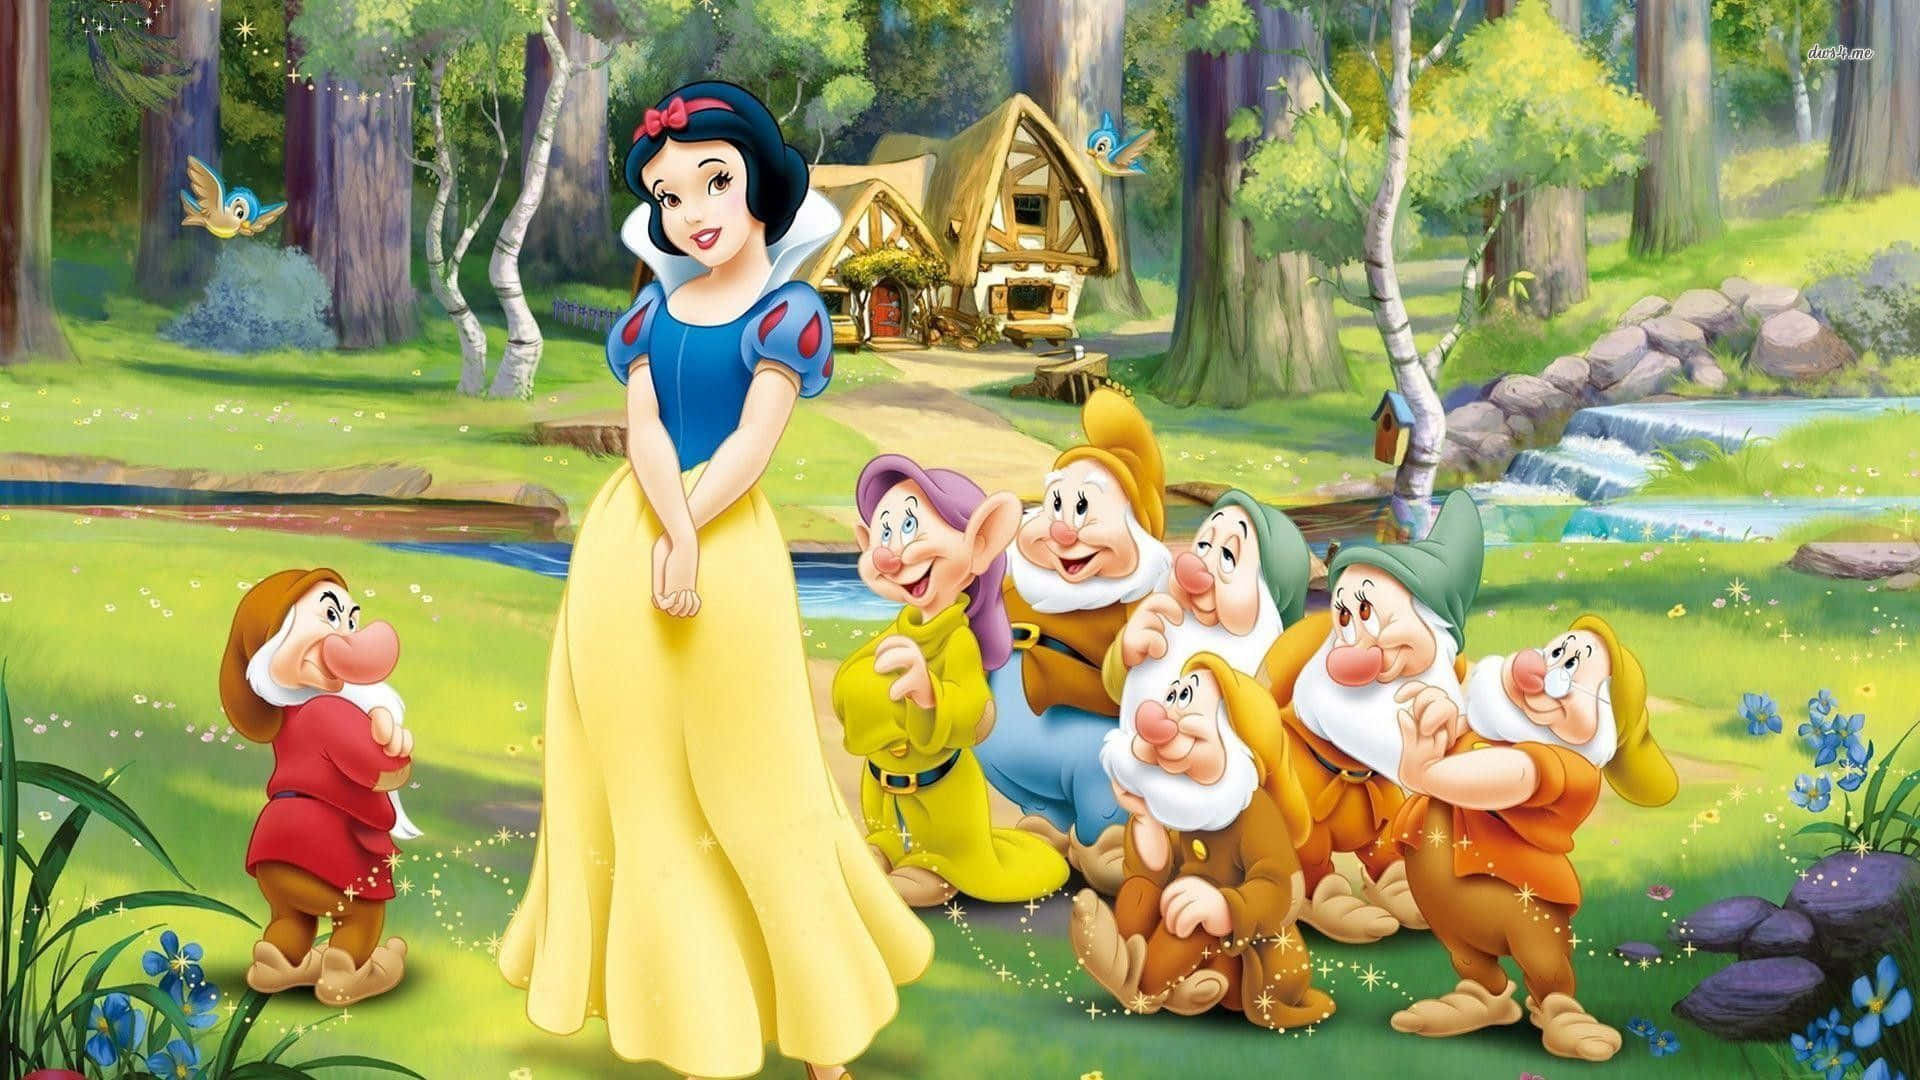 Classic Fairytale Tale of Snow White